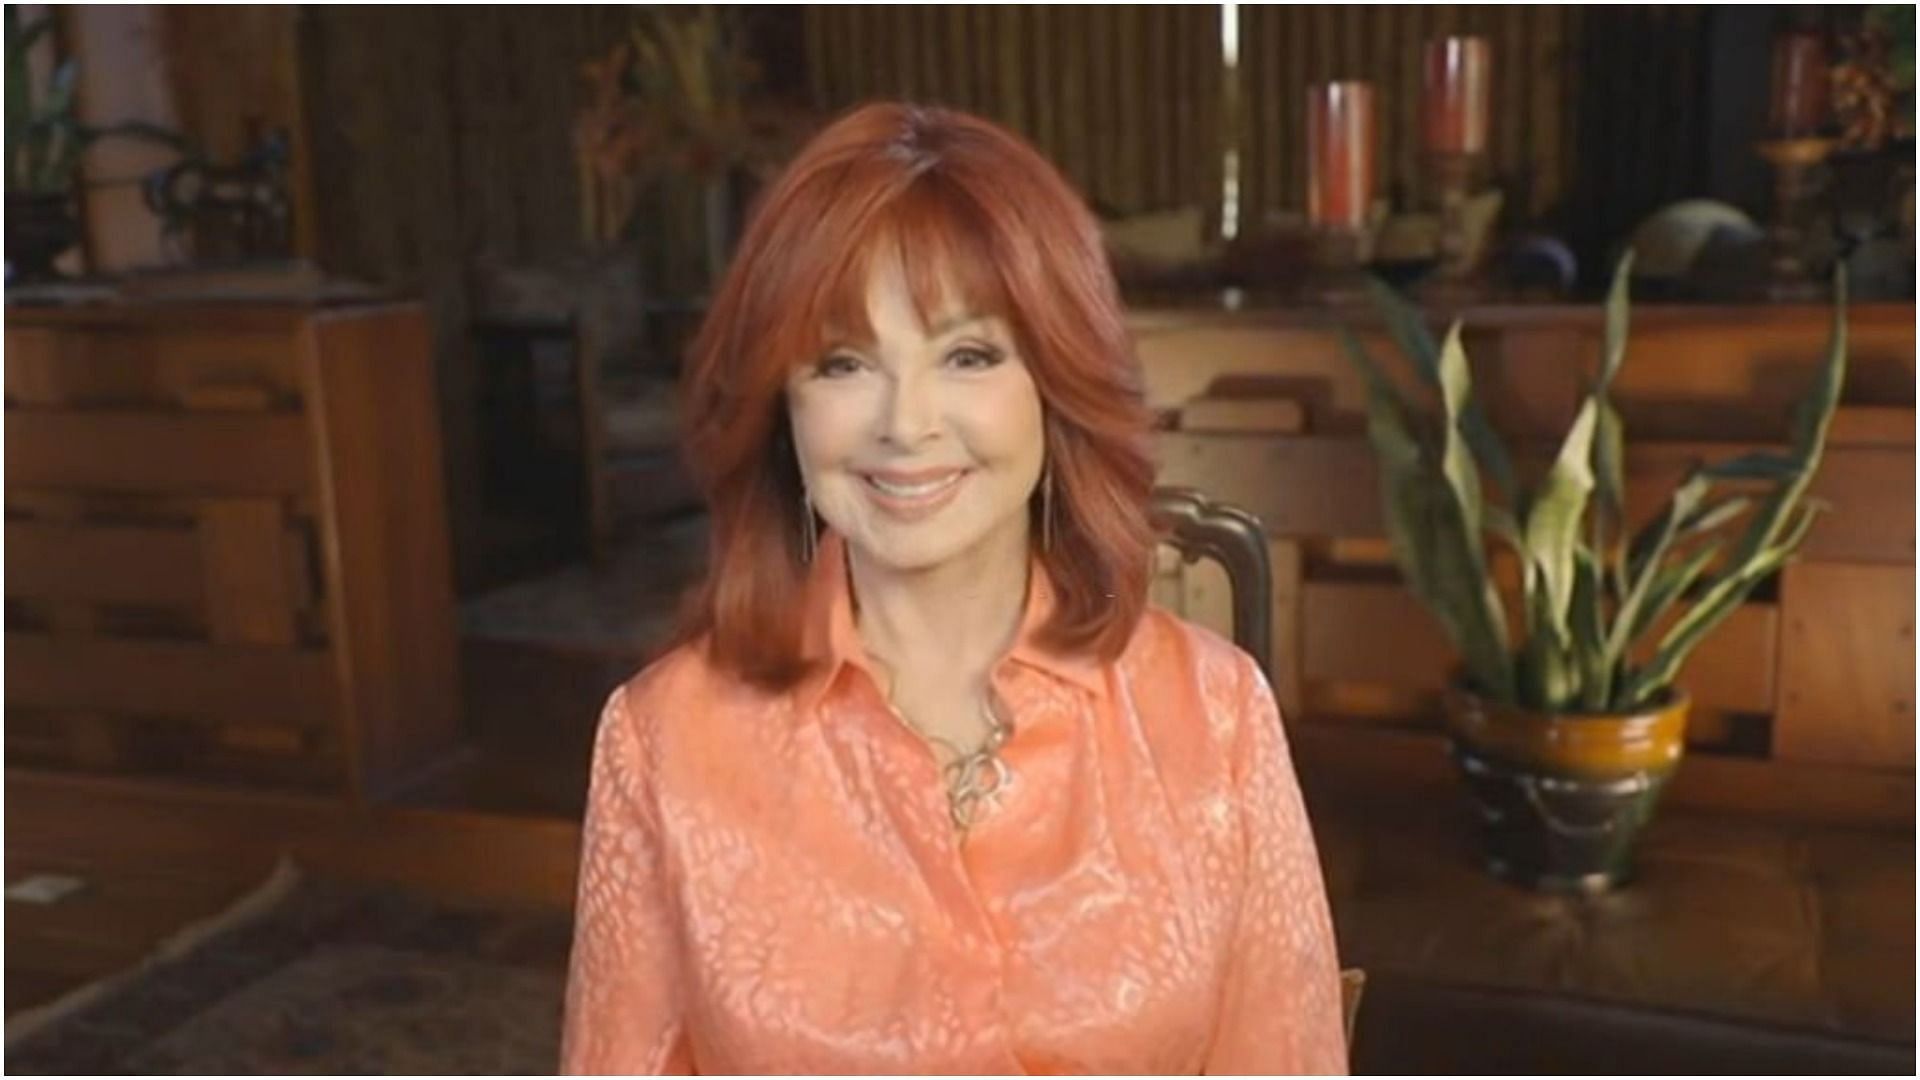 Naomi Judd recently died at the age of 76 (Image via Bravo/Getty Images)